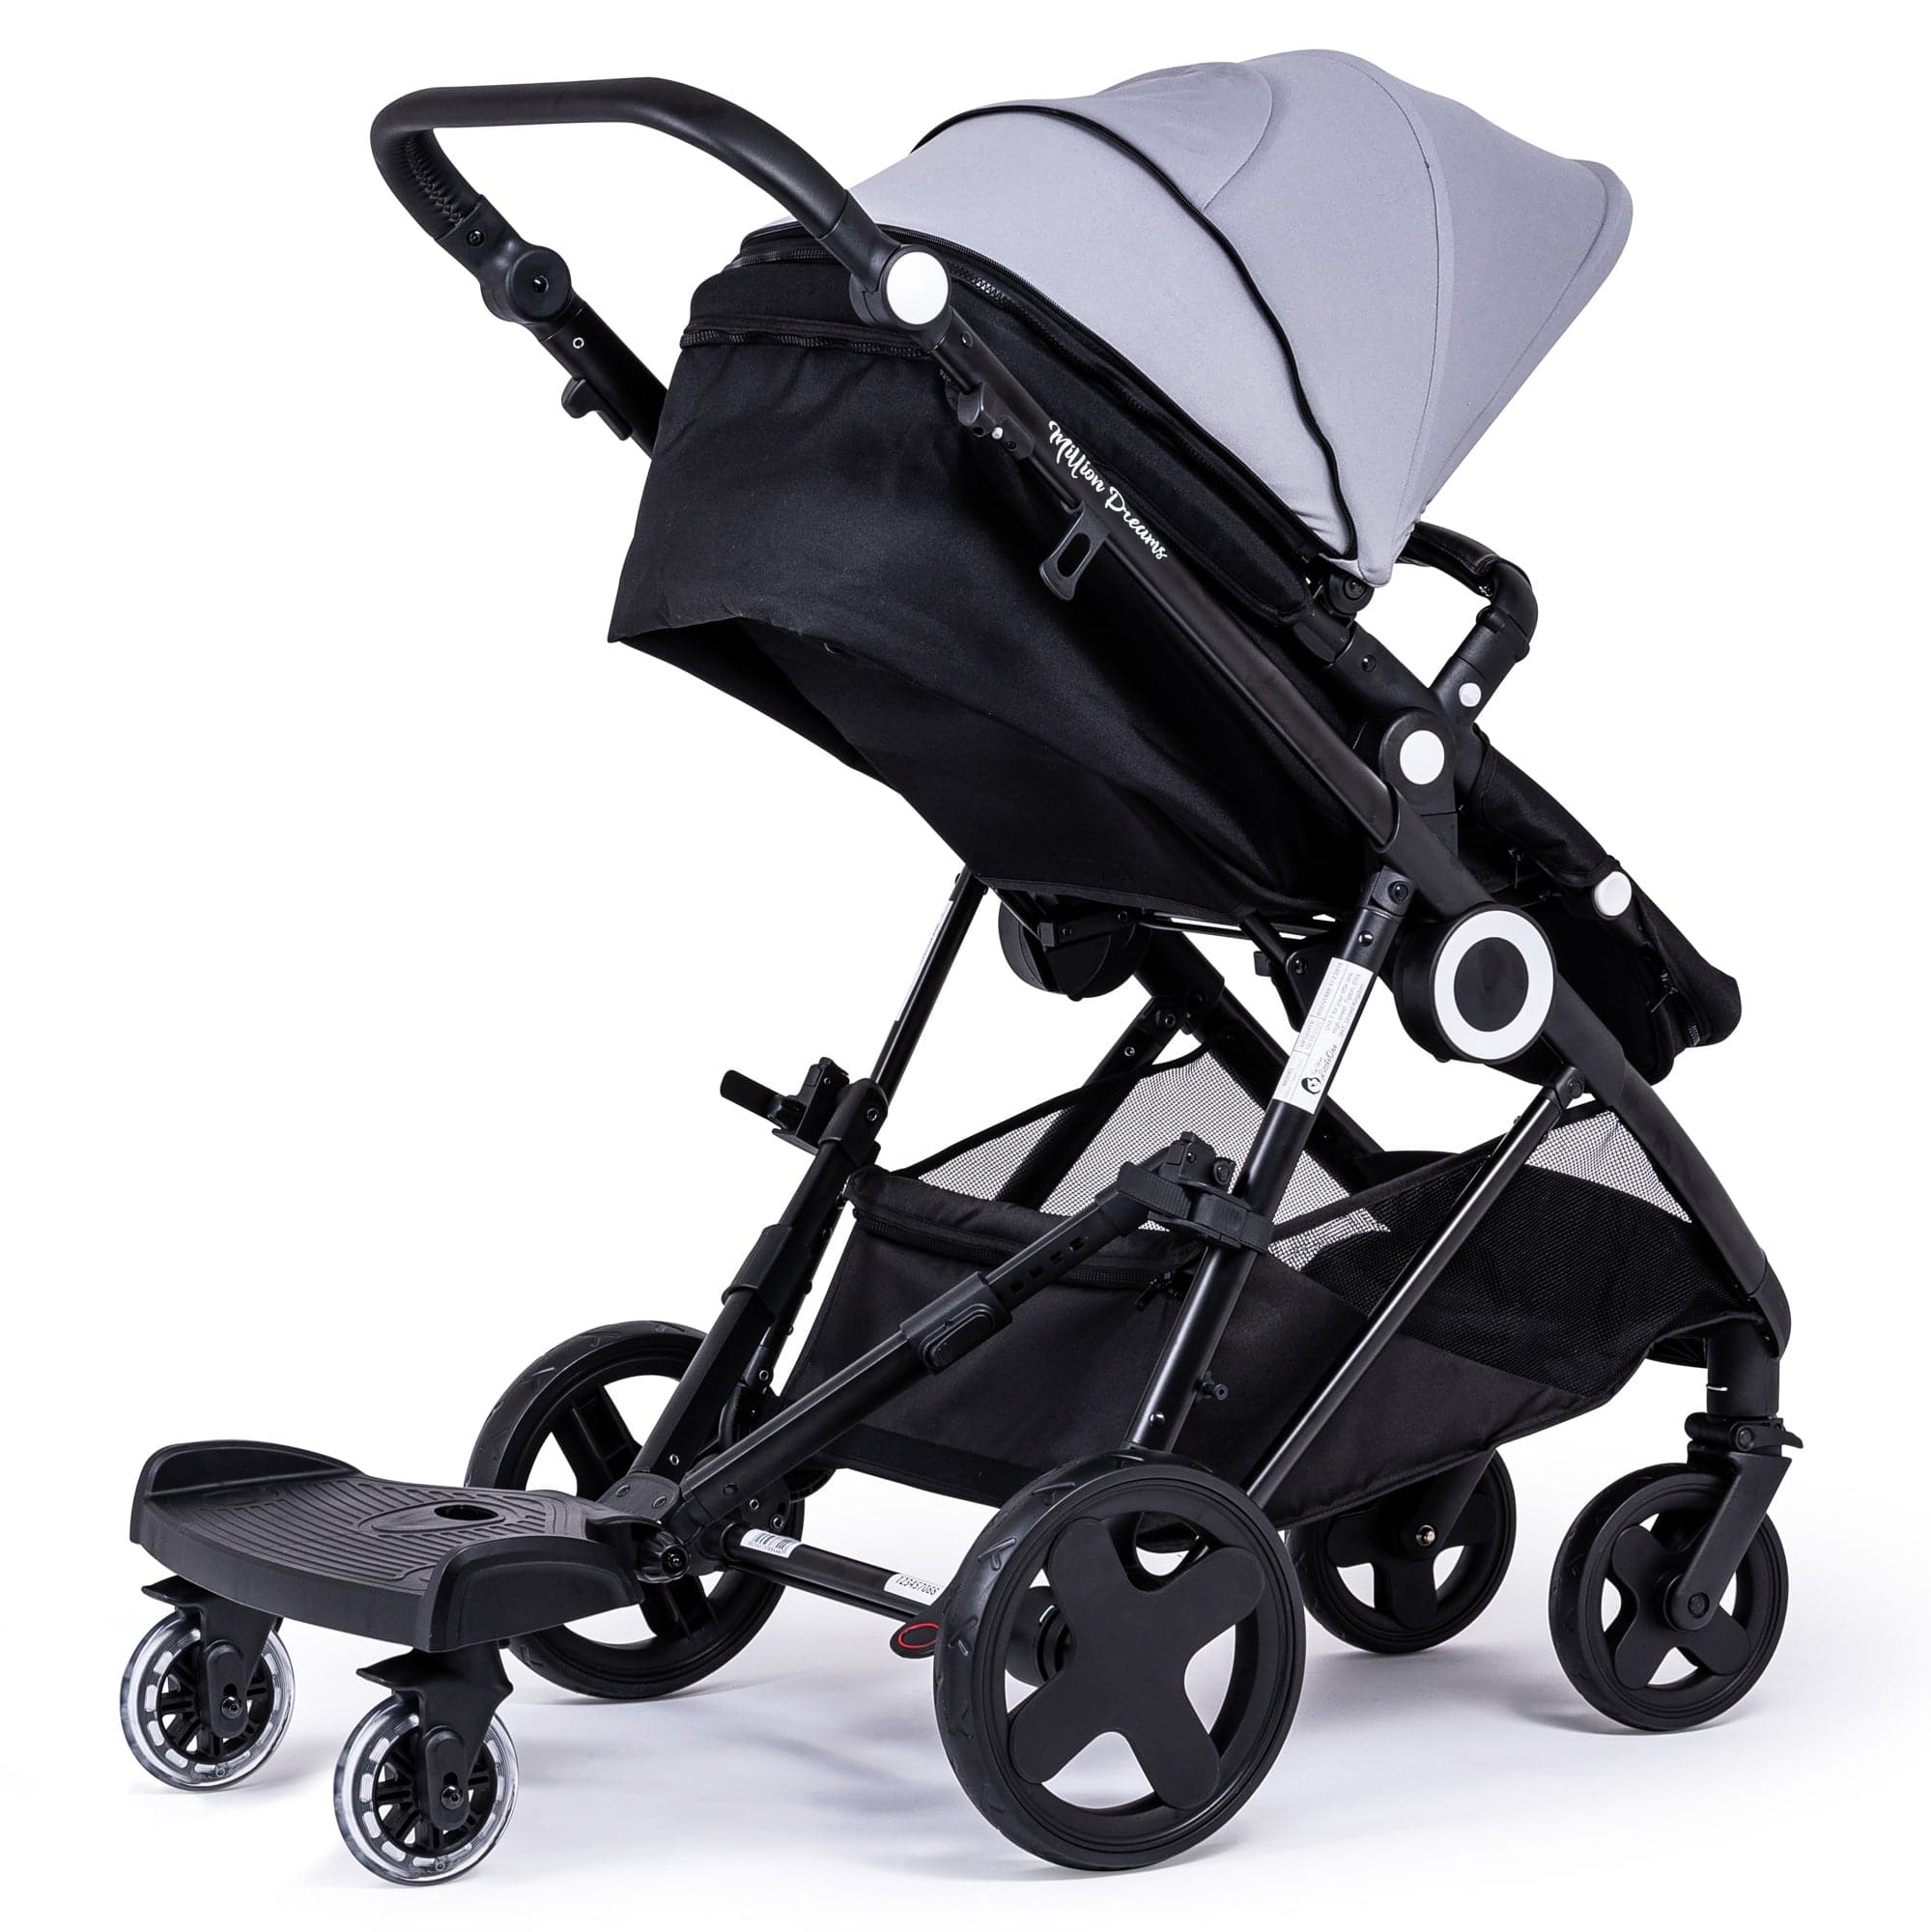 Ride On Board with Seat Compatible with Petite Star - For Your Little One